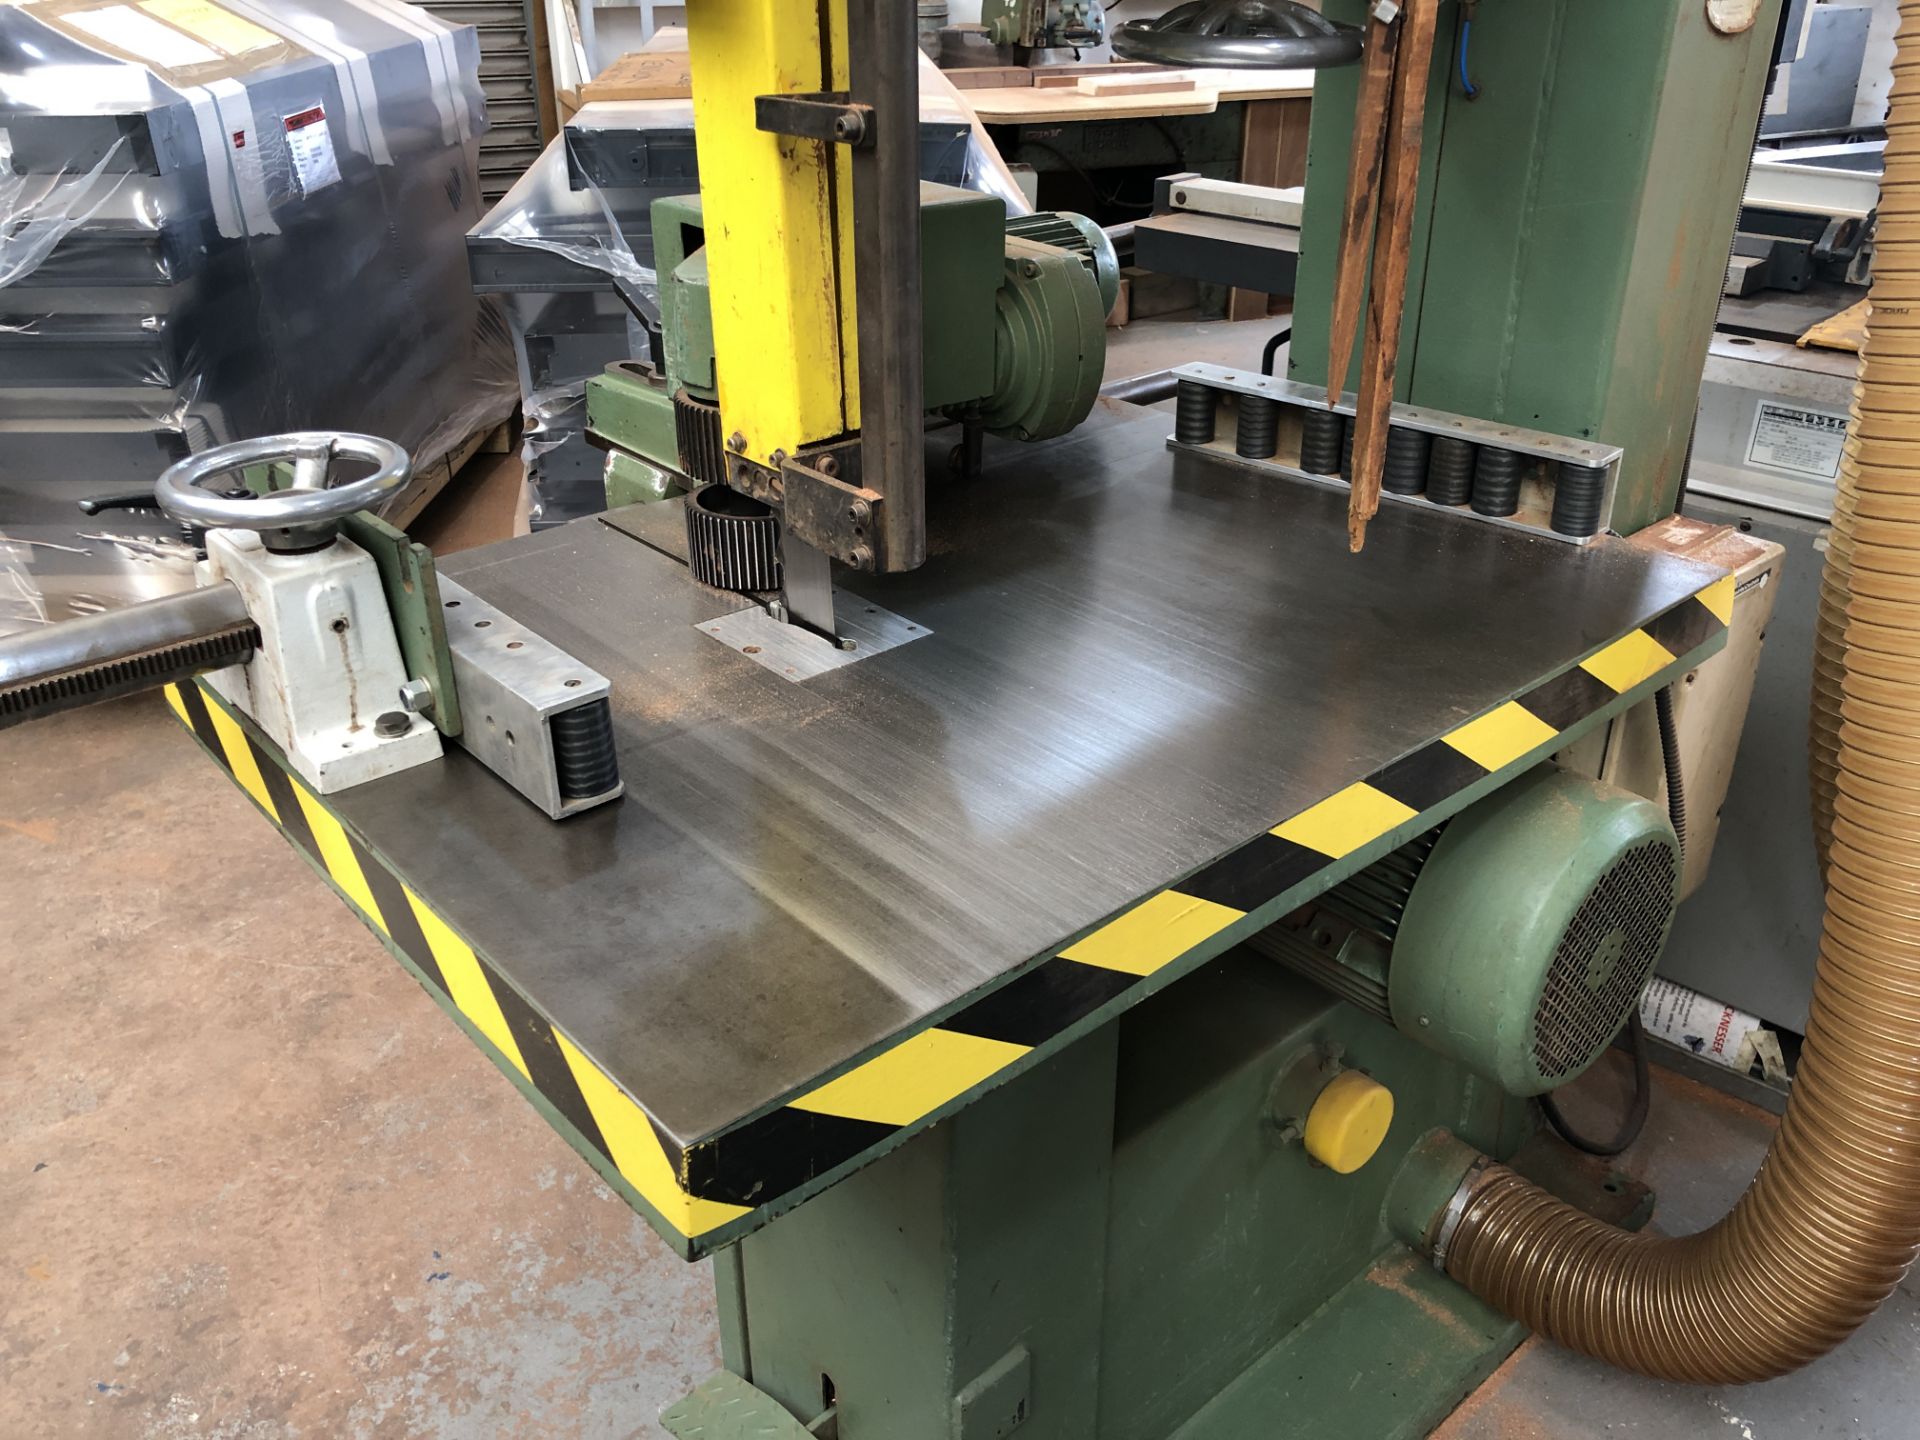 Wadkin PBRHD 89860 Power Band Resaw Bed size 1mtr x 0.75mtr 3phase(Please note: Item needs - Image 12 of 20